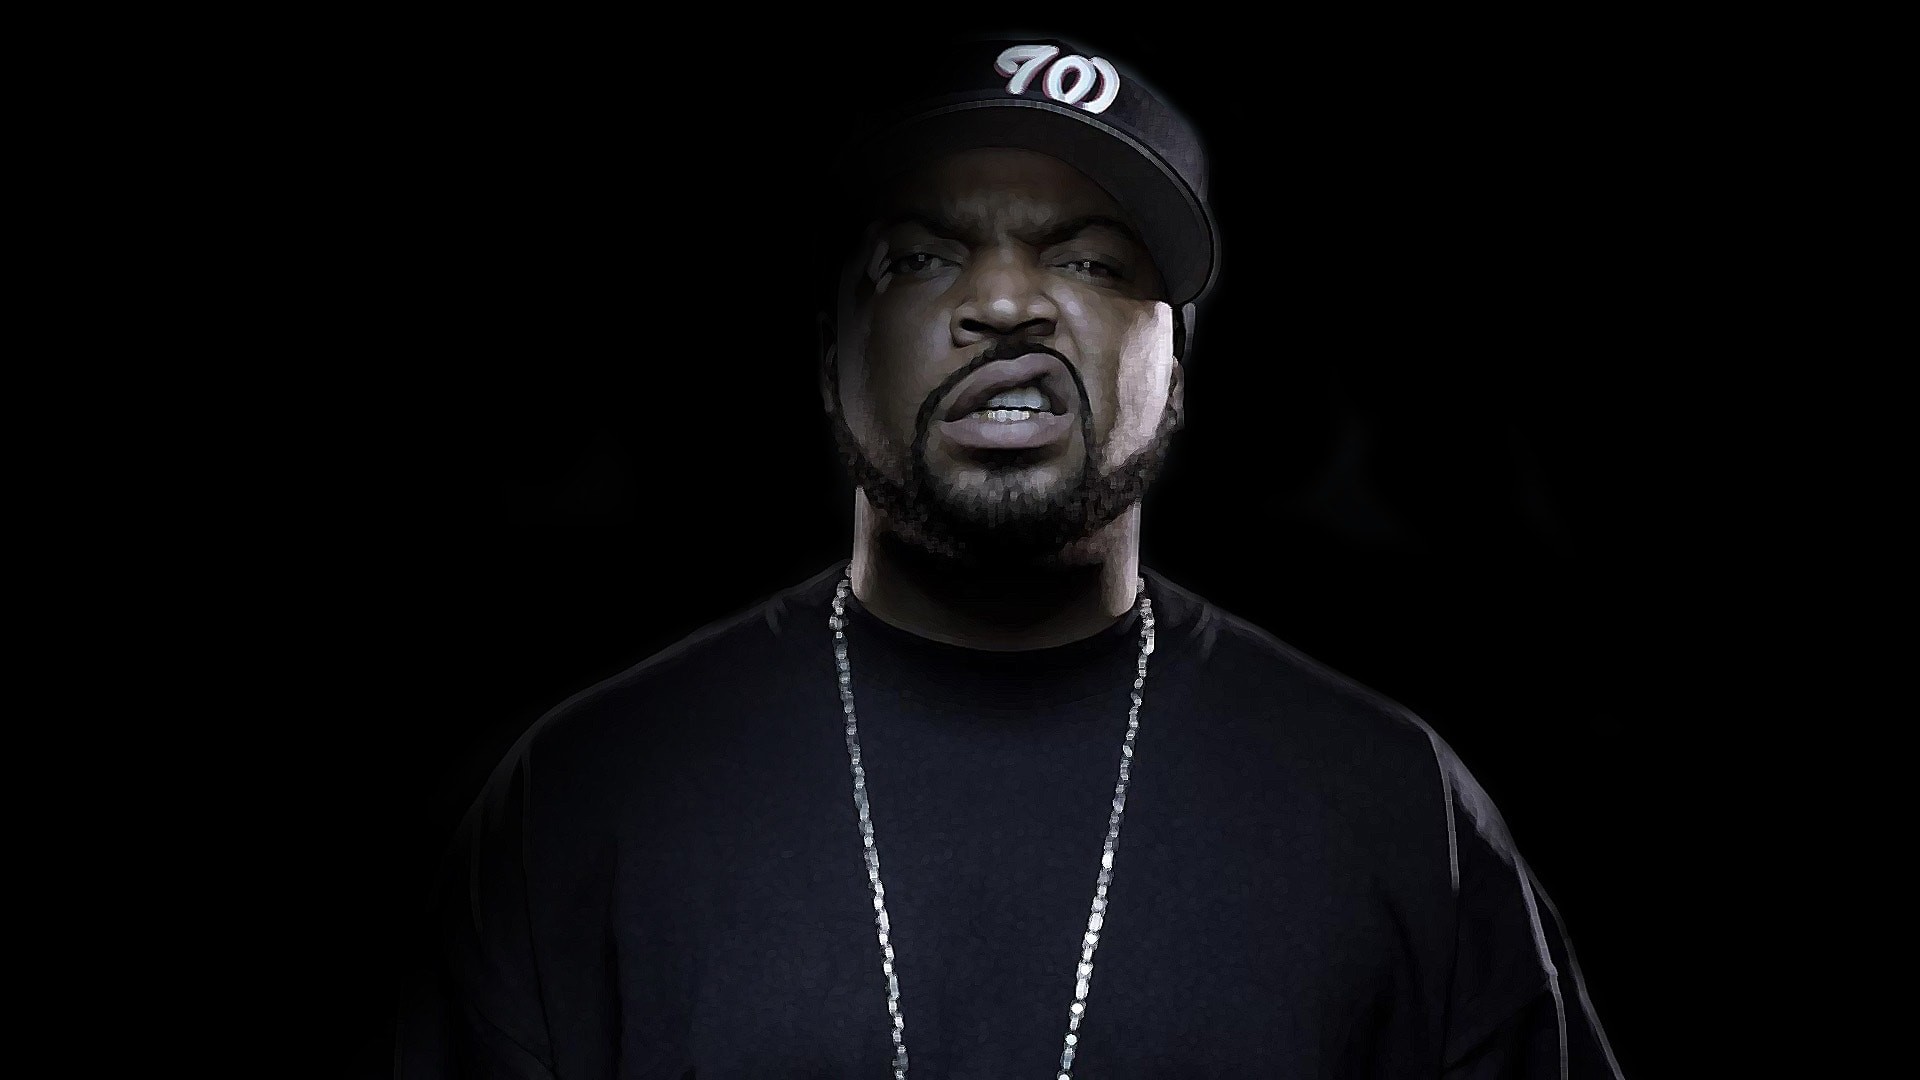 1920x1080 Ice Cube Wallpapers Ice Cube widescreen wallpapers